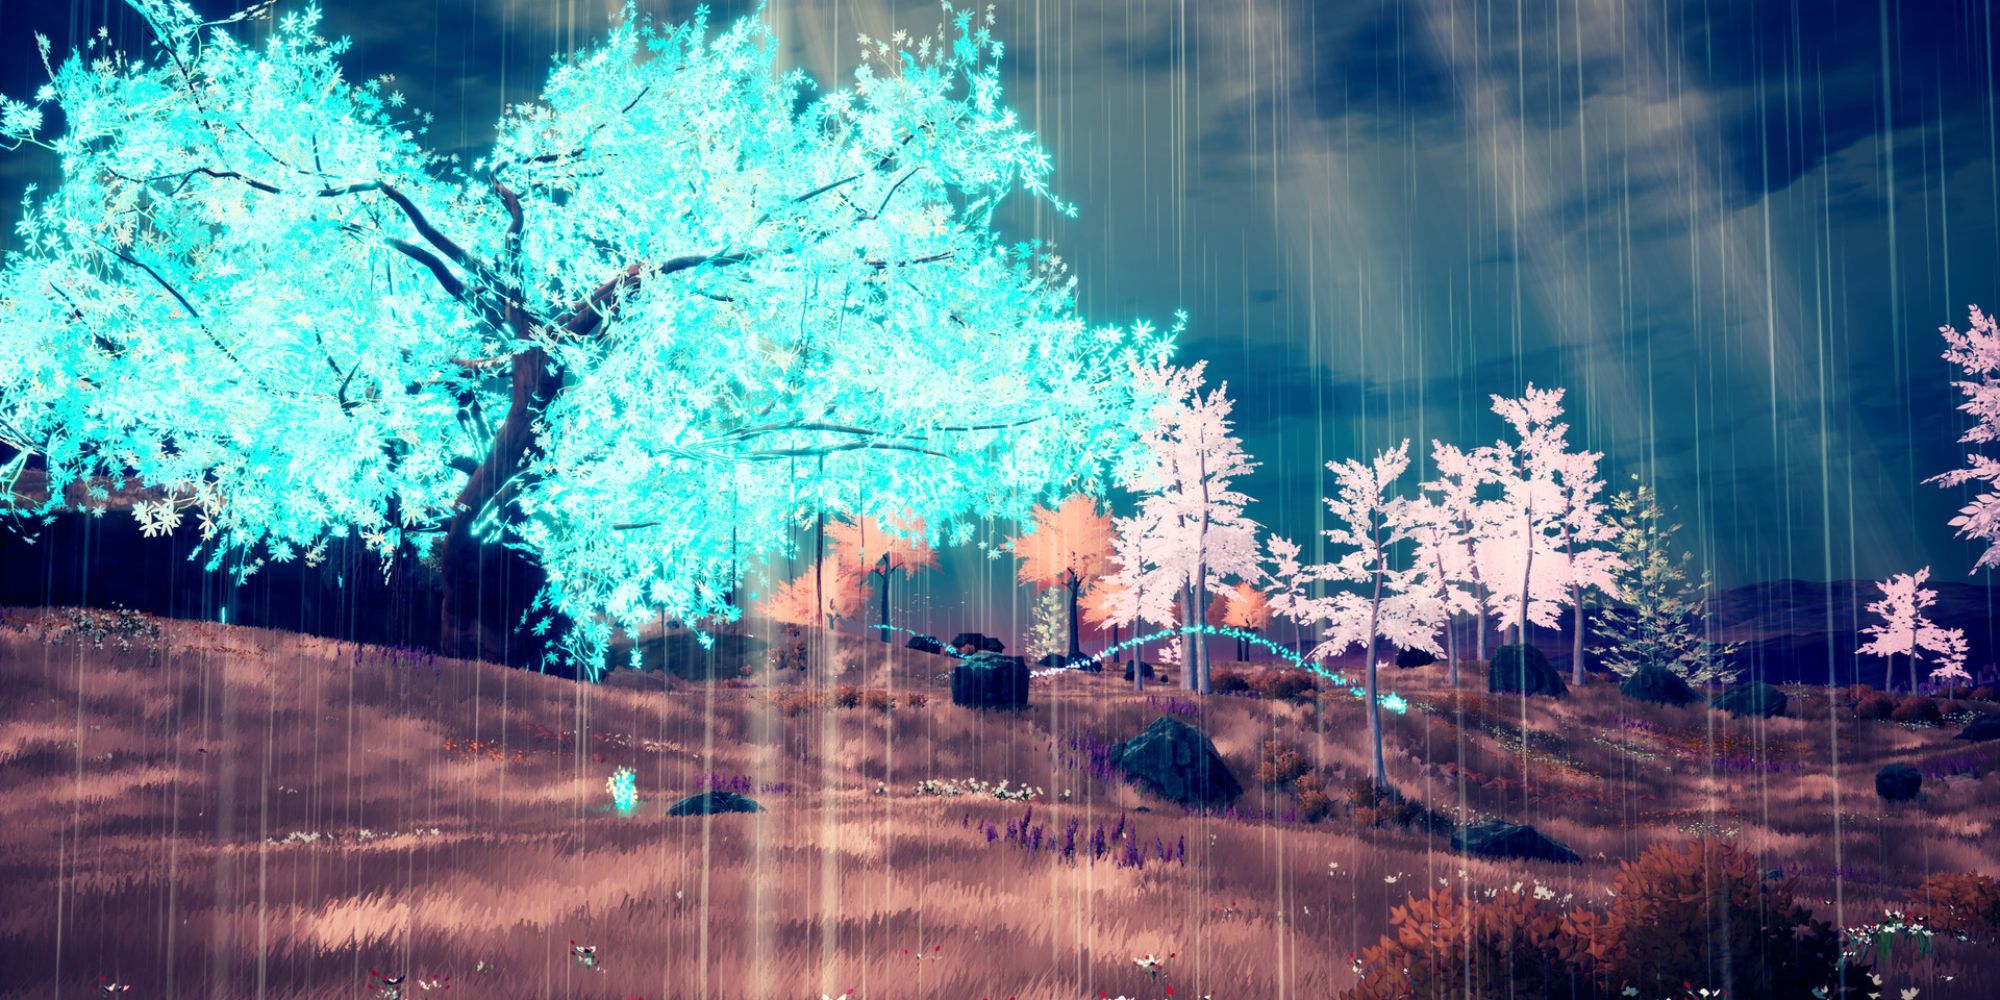 A blue glowing tree in the rain in The Companion